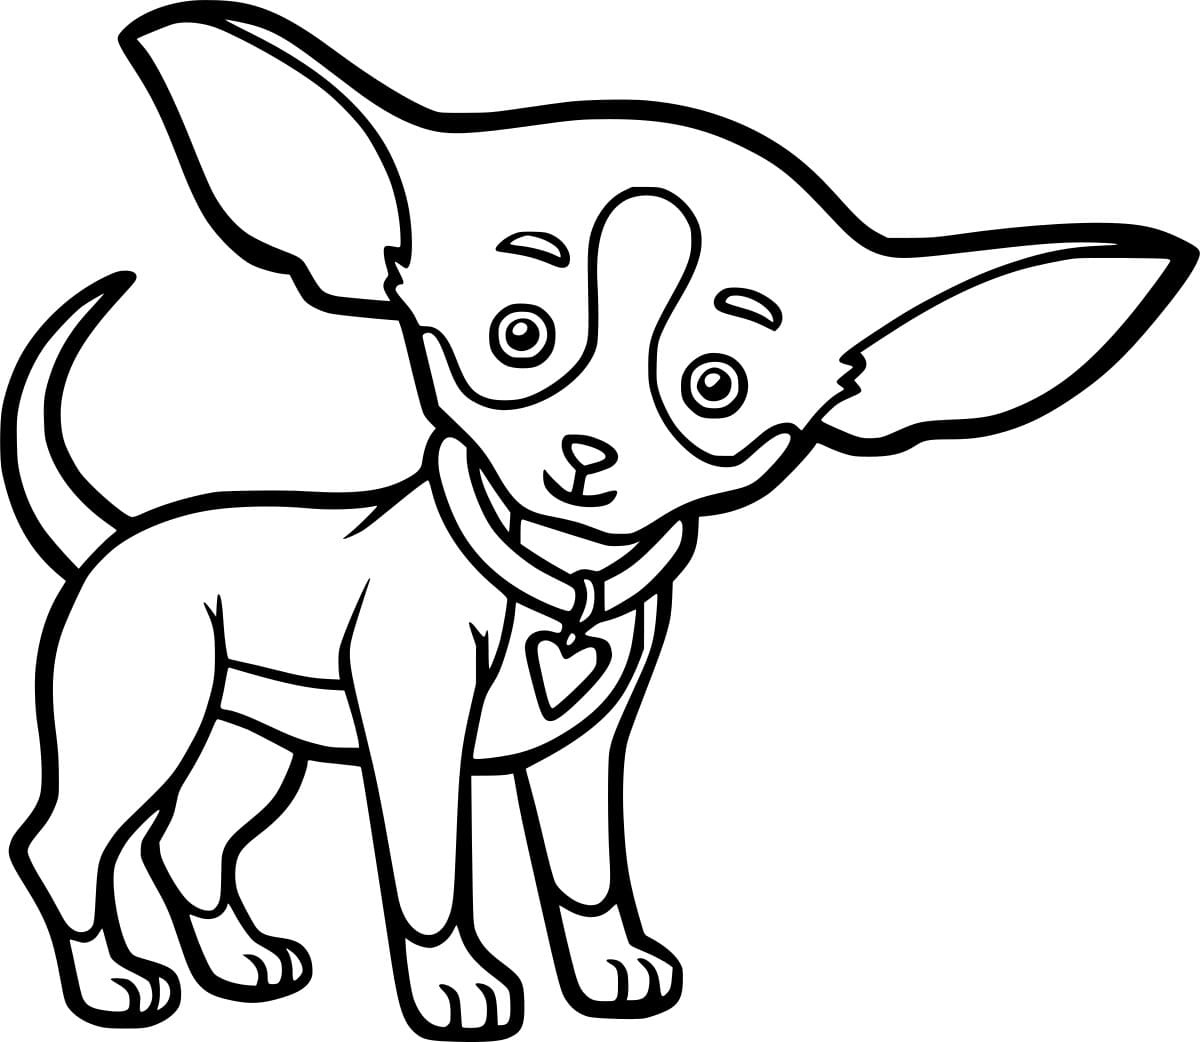 Big Ears Chihuahua Coloring Pages - Coloring Cool